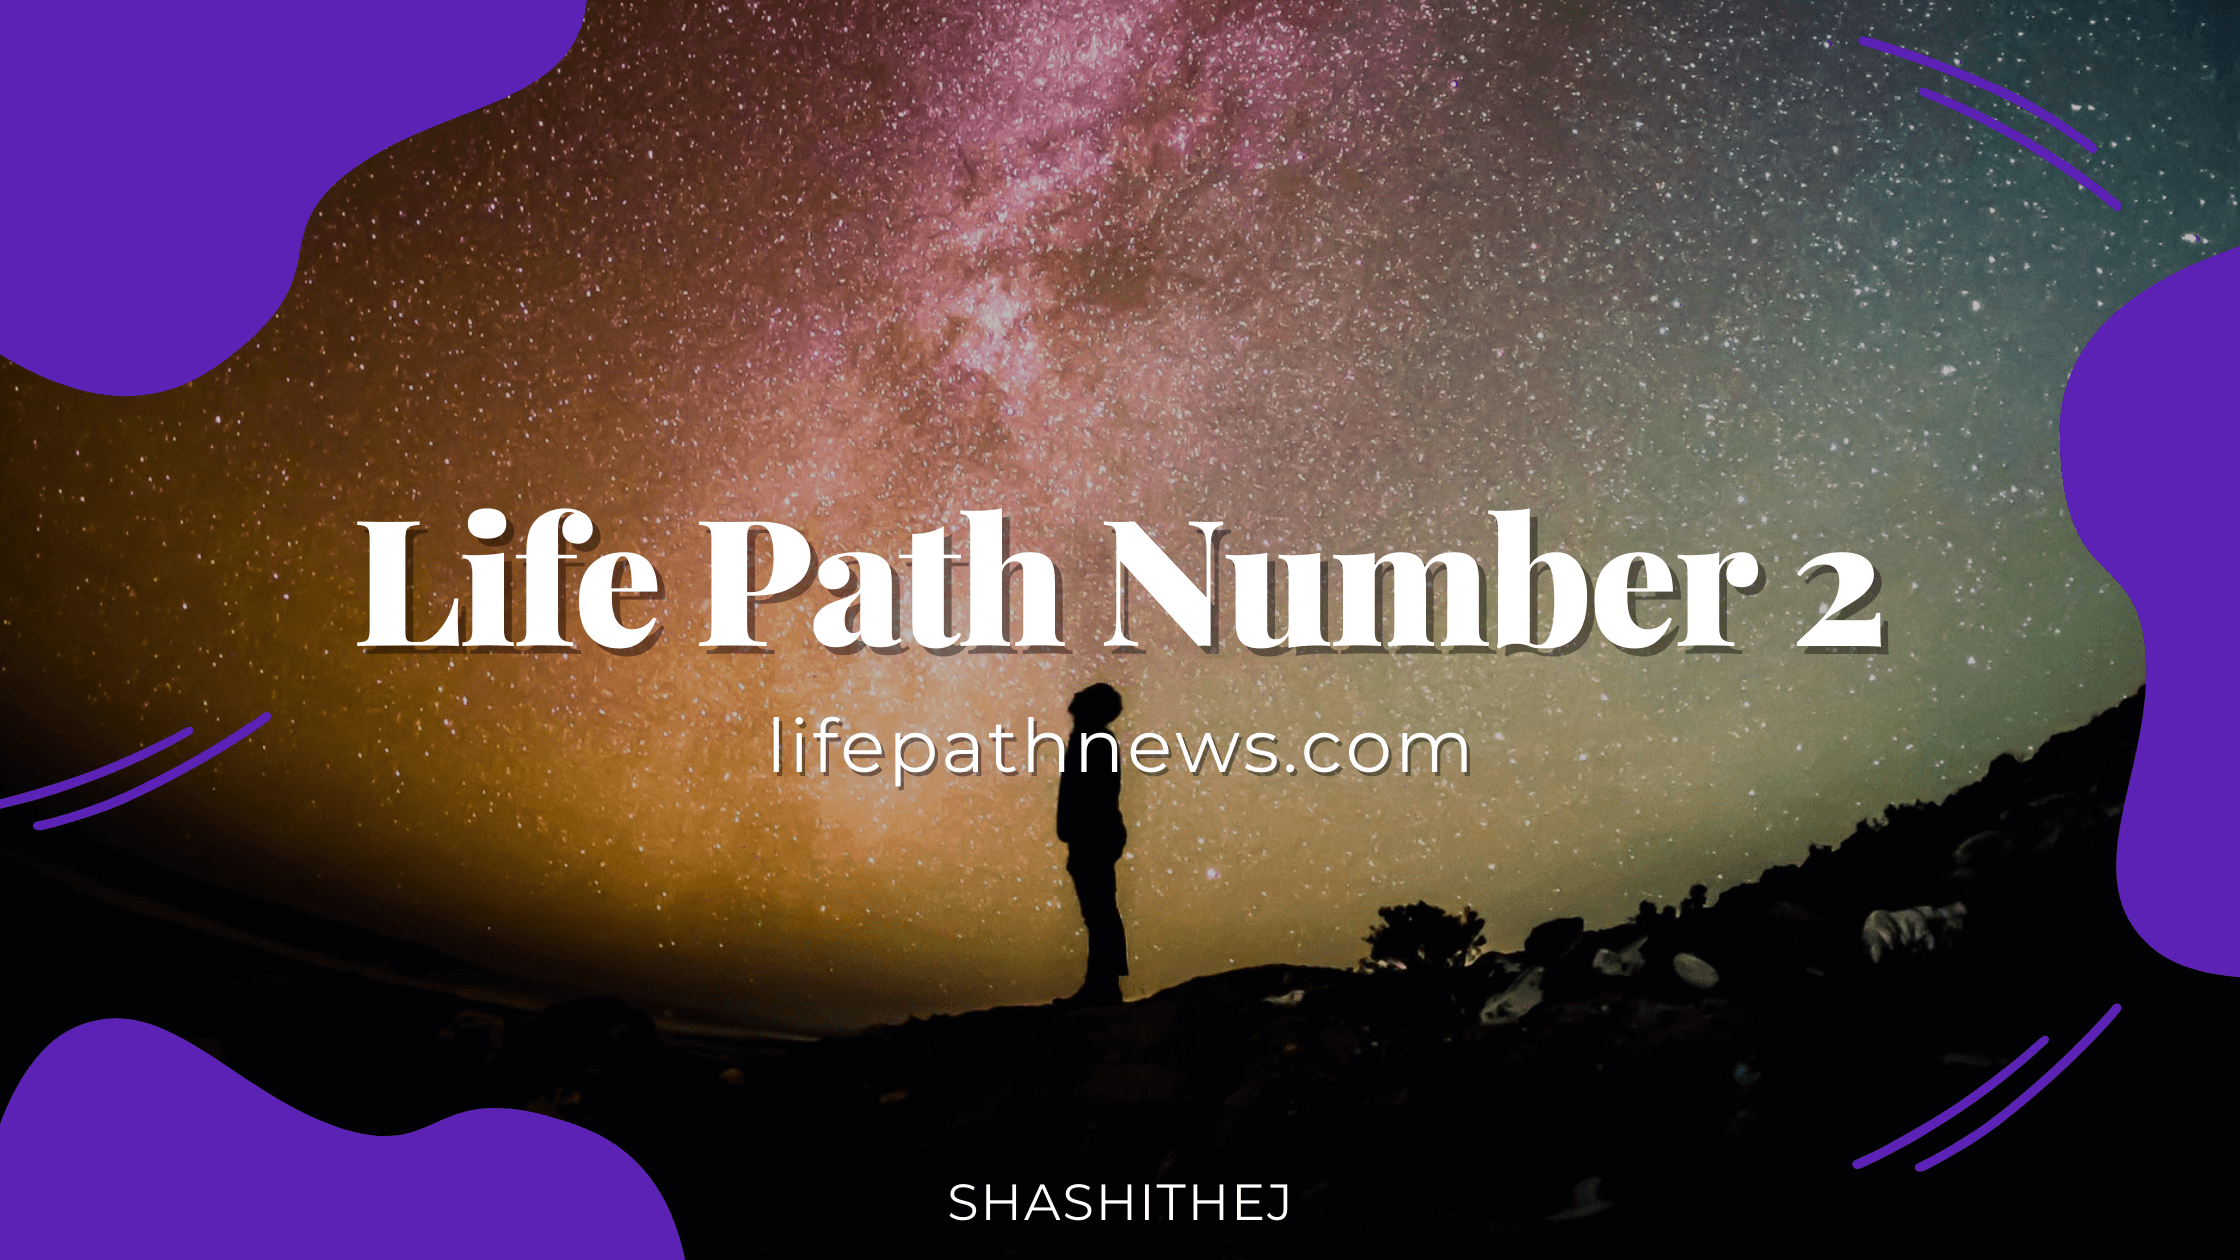 Life Path Number 2